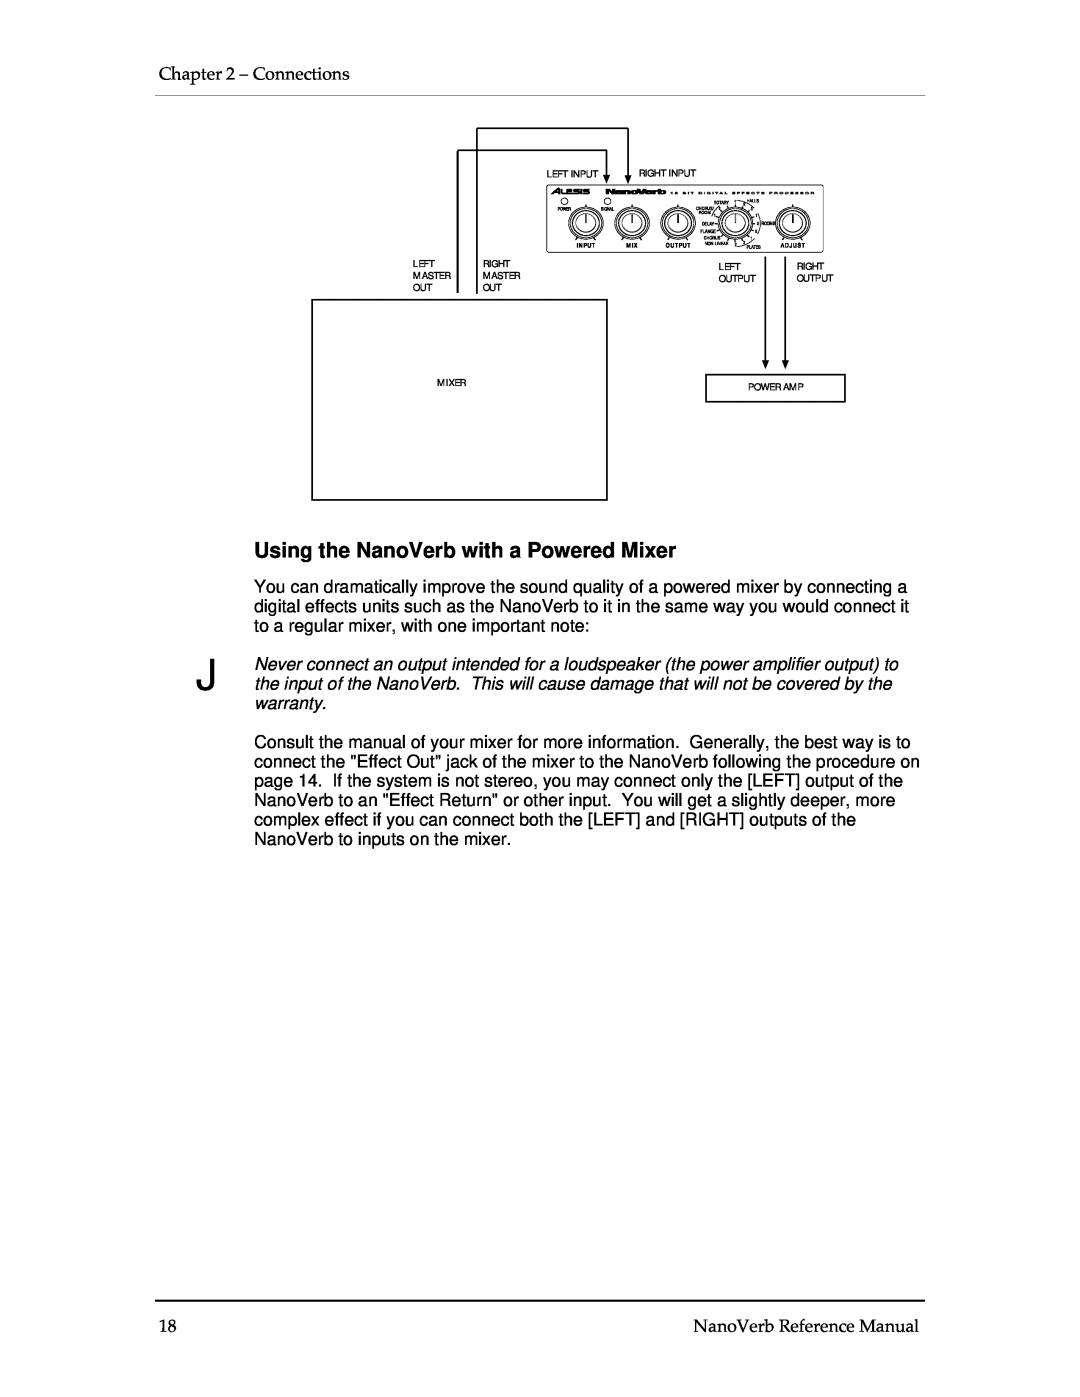 Alesis Stereo Amplifier manual Using the NanoVerb with a Powered Mixer, warranty 